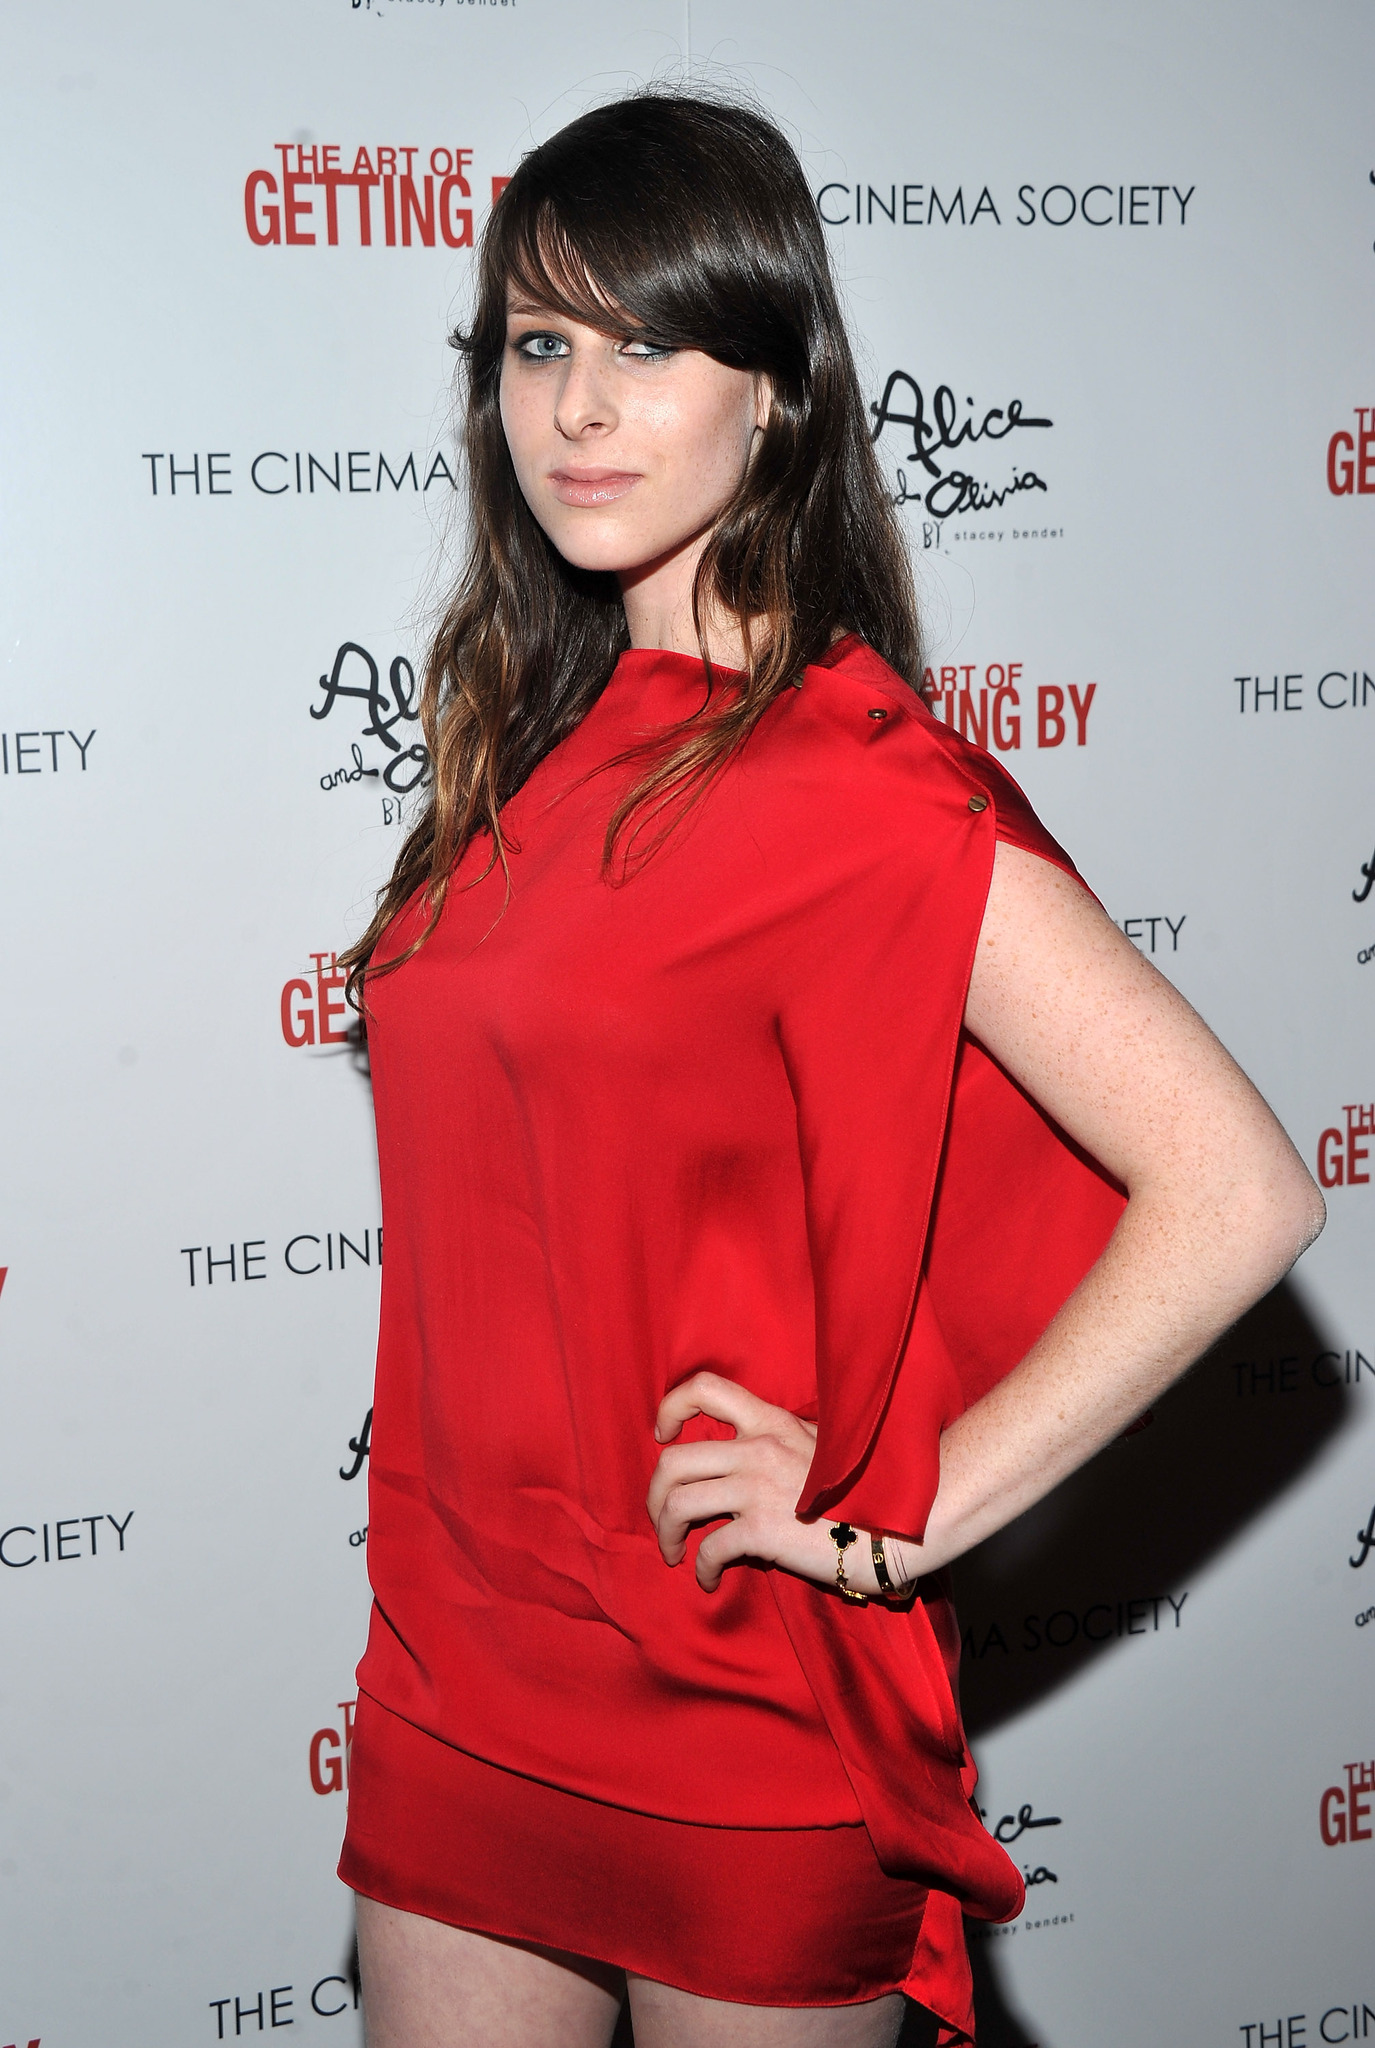 Sasha Spielberg at event of The Art of Getting By (2011)